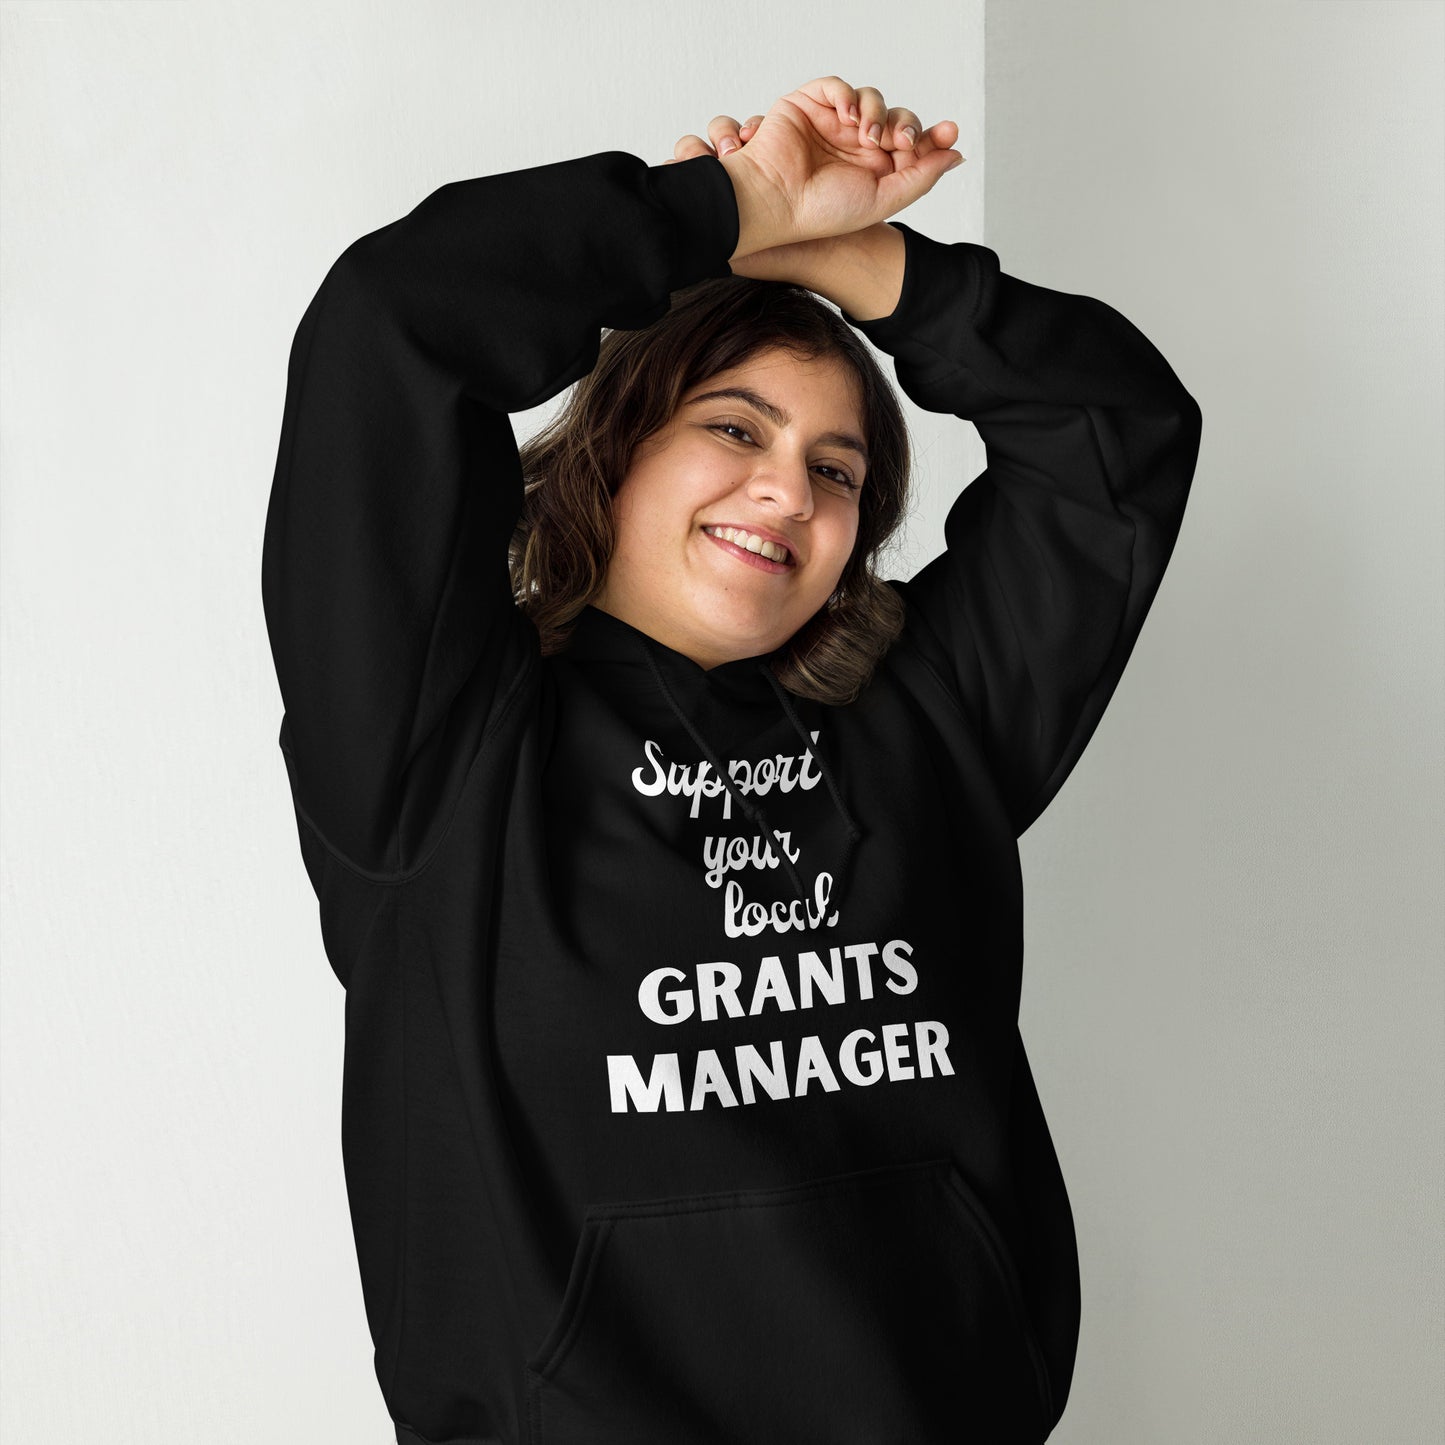 Support Your Local Grants Manager Unisex Hoodie